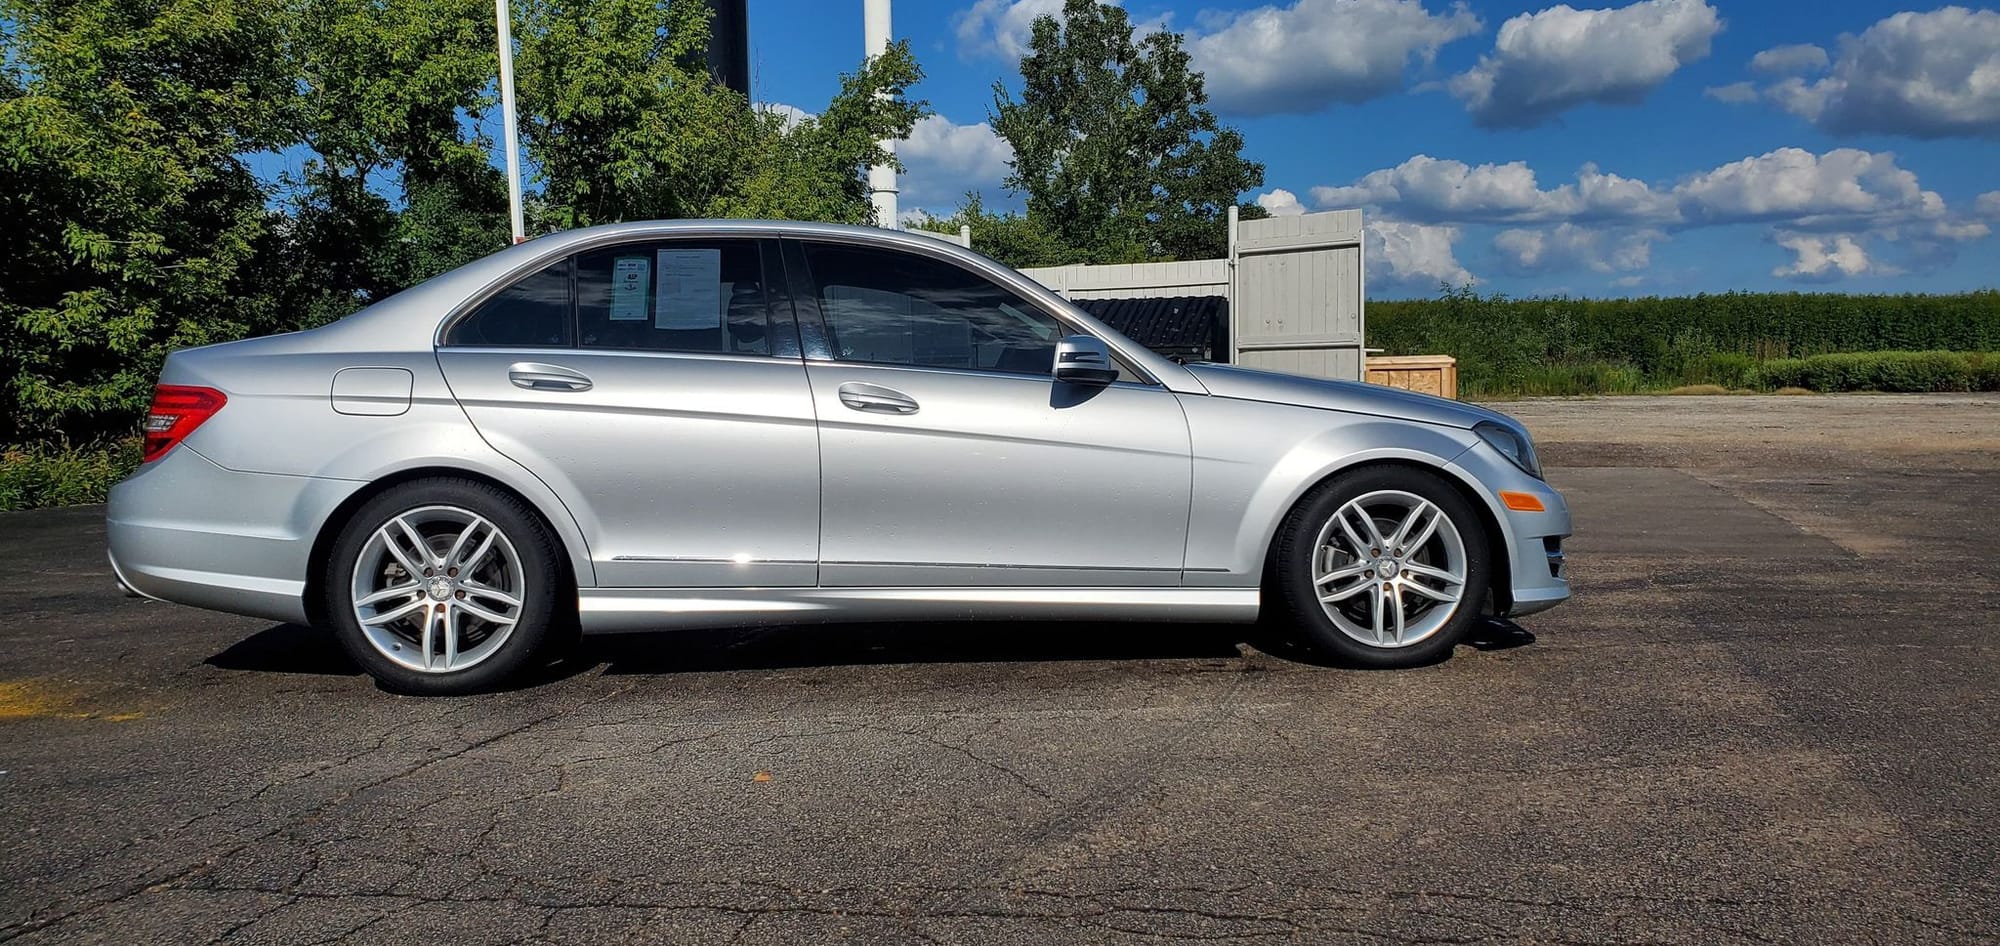 2012 Mercedes-Benz C300 - Like new 2012 Mercedes- Benz C300 4-Matic - Used - VIN WDDGF8BB7CR212037 - 88,410 Miles - 6 cyl - AWD - Automatic - Sedan - Silver - East Dundee, IL 60118, United States